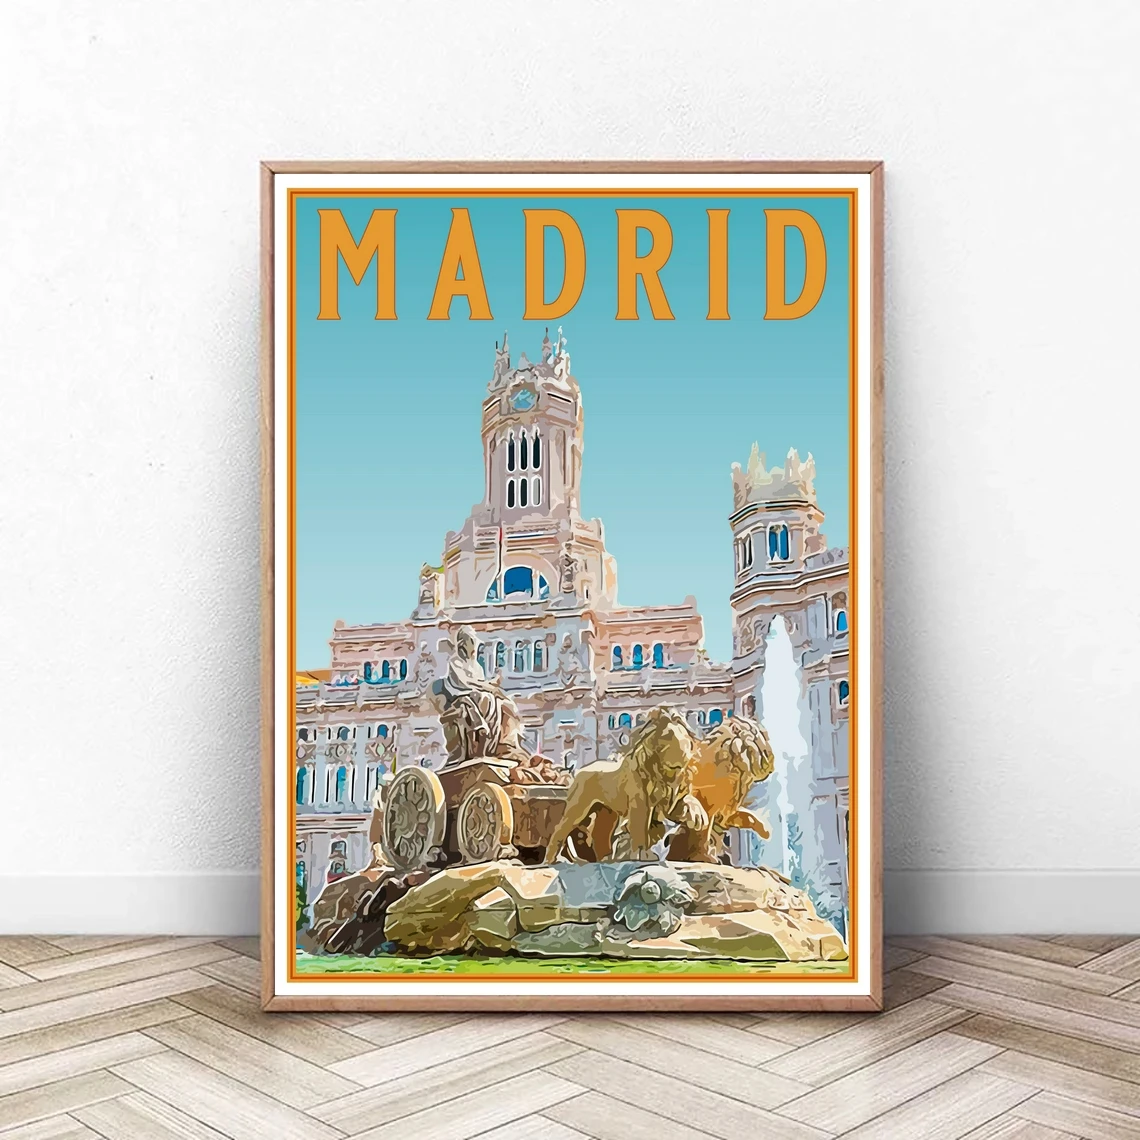 

Madrid Travel Poster, Vintage Serigraph Style Poster, Spain, Wall Art, Art Print, Travel, Vacation, Souvenir, Frame Not Included